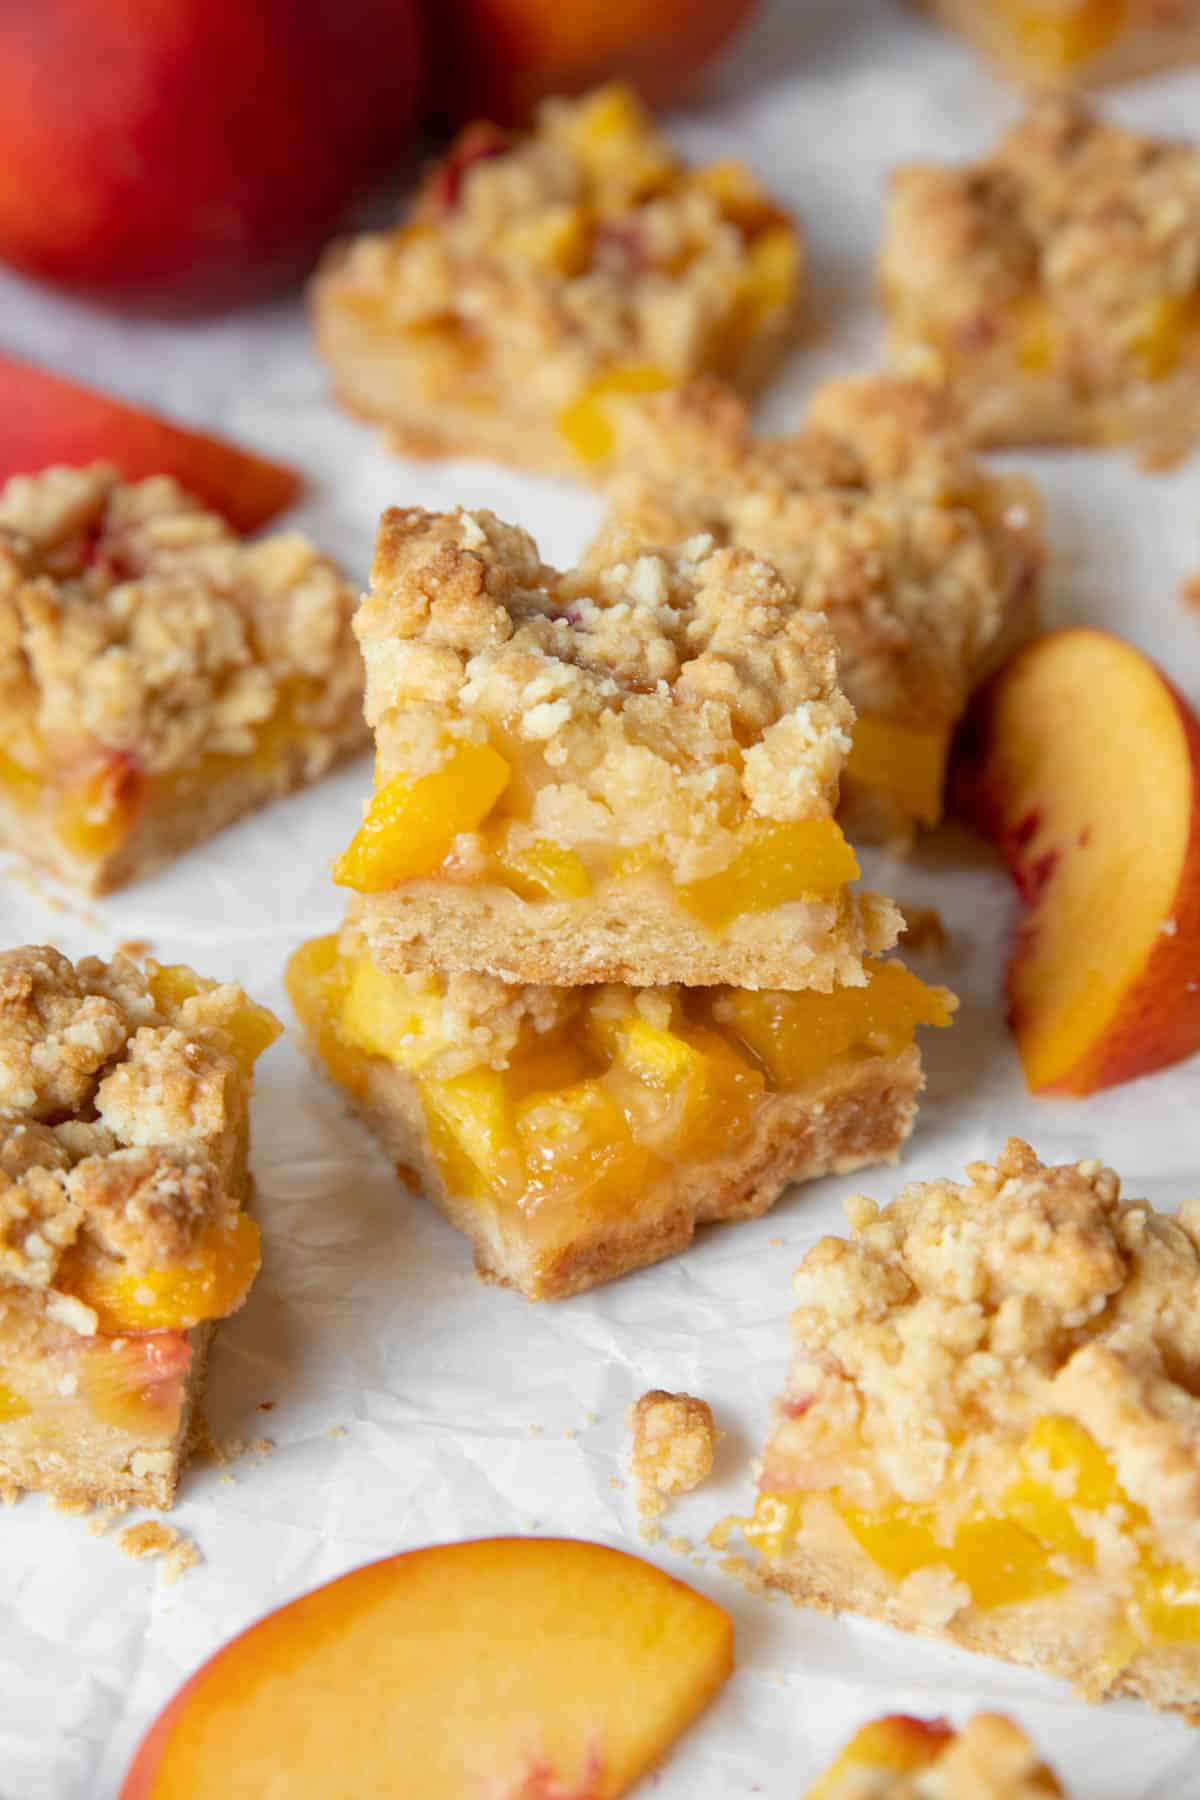 Two peach bars sit on top of each other with the other peach bars on white parchment paper.